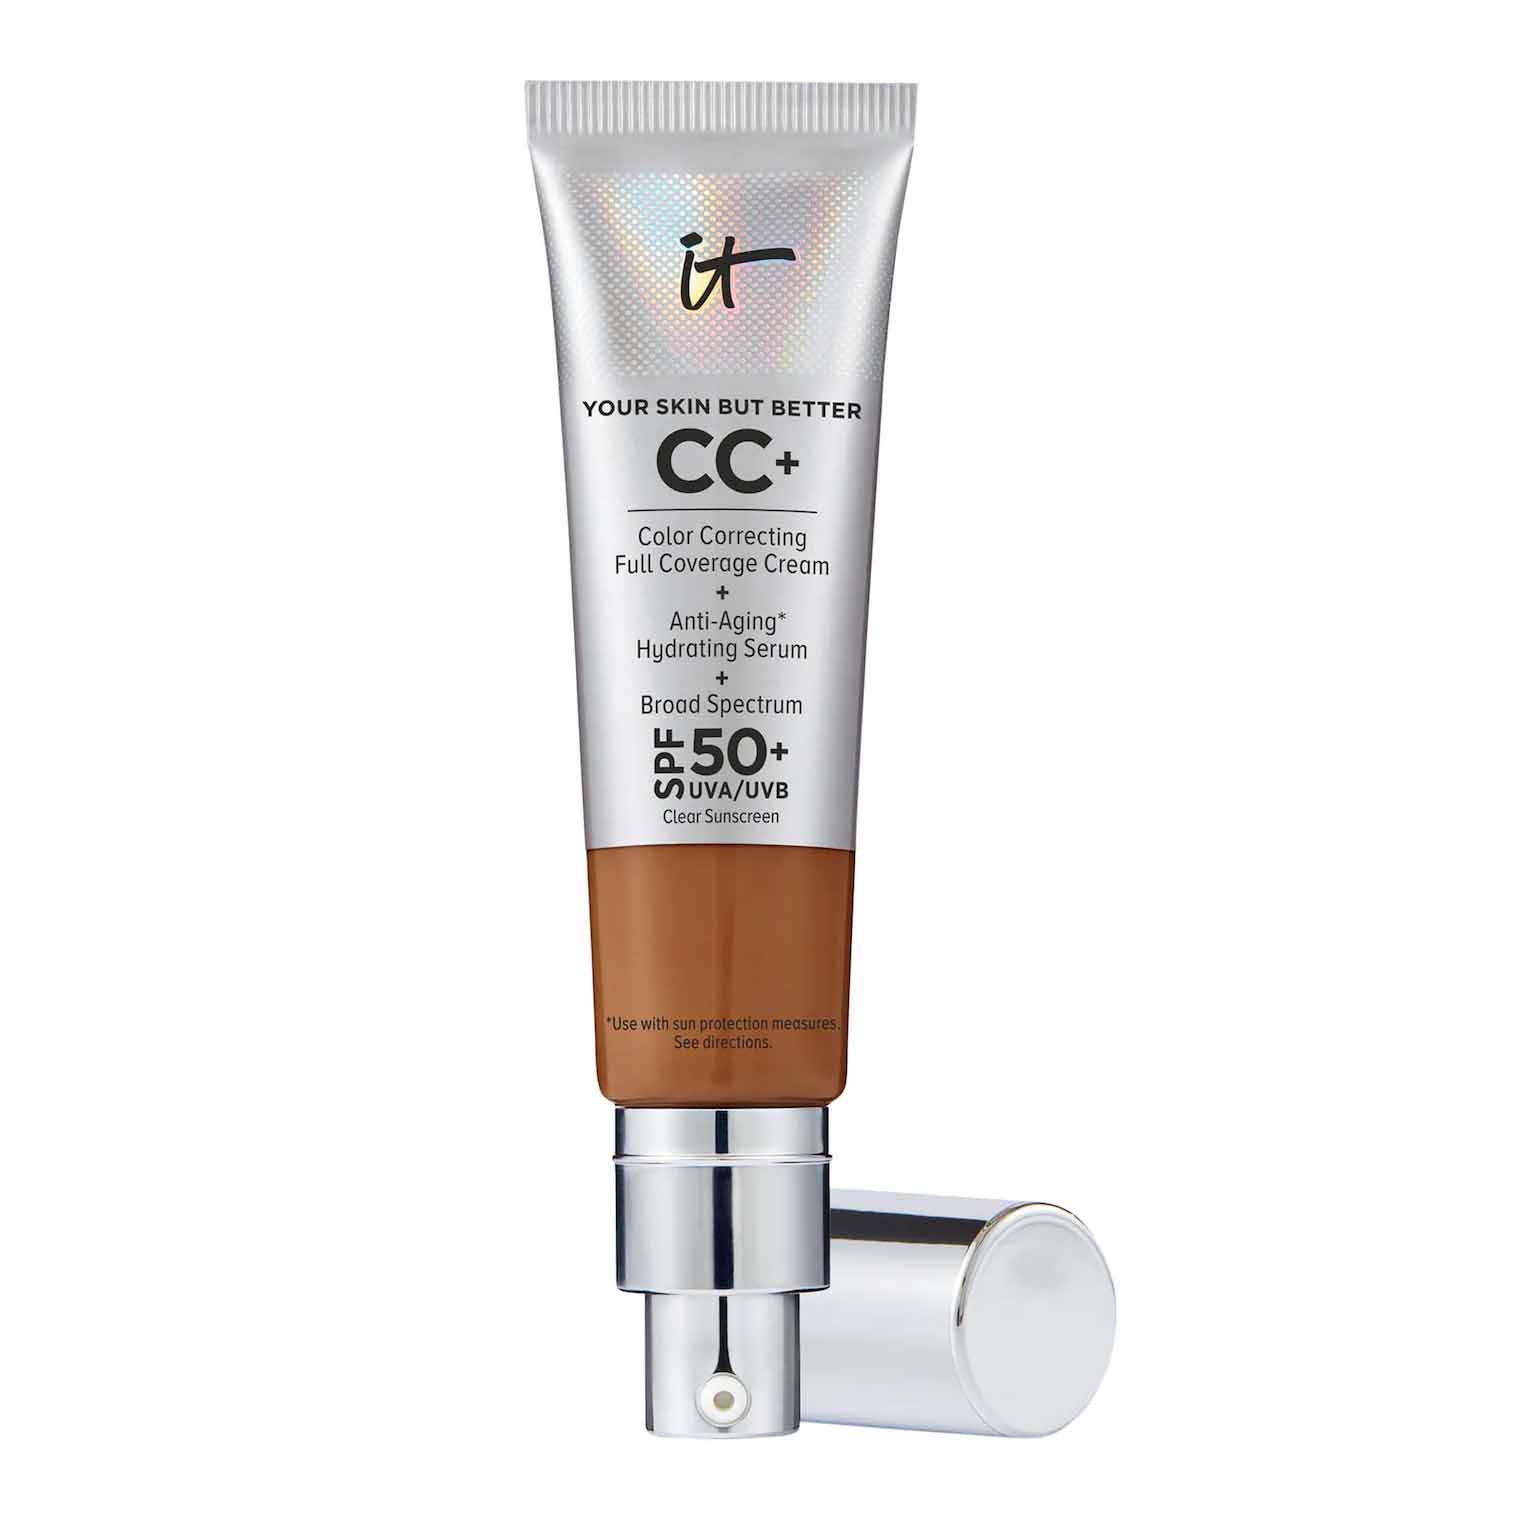  IT Cosmetics CC+ Cream Full Coverage Color Correcting Foundation with SPF 50+ in the shade neutral rich